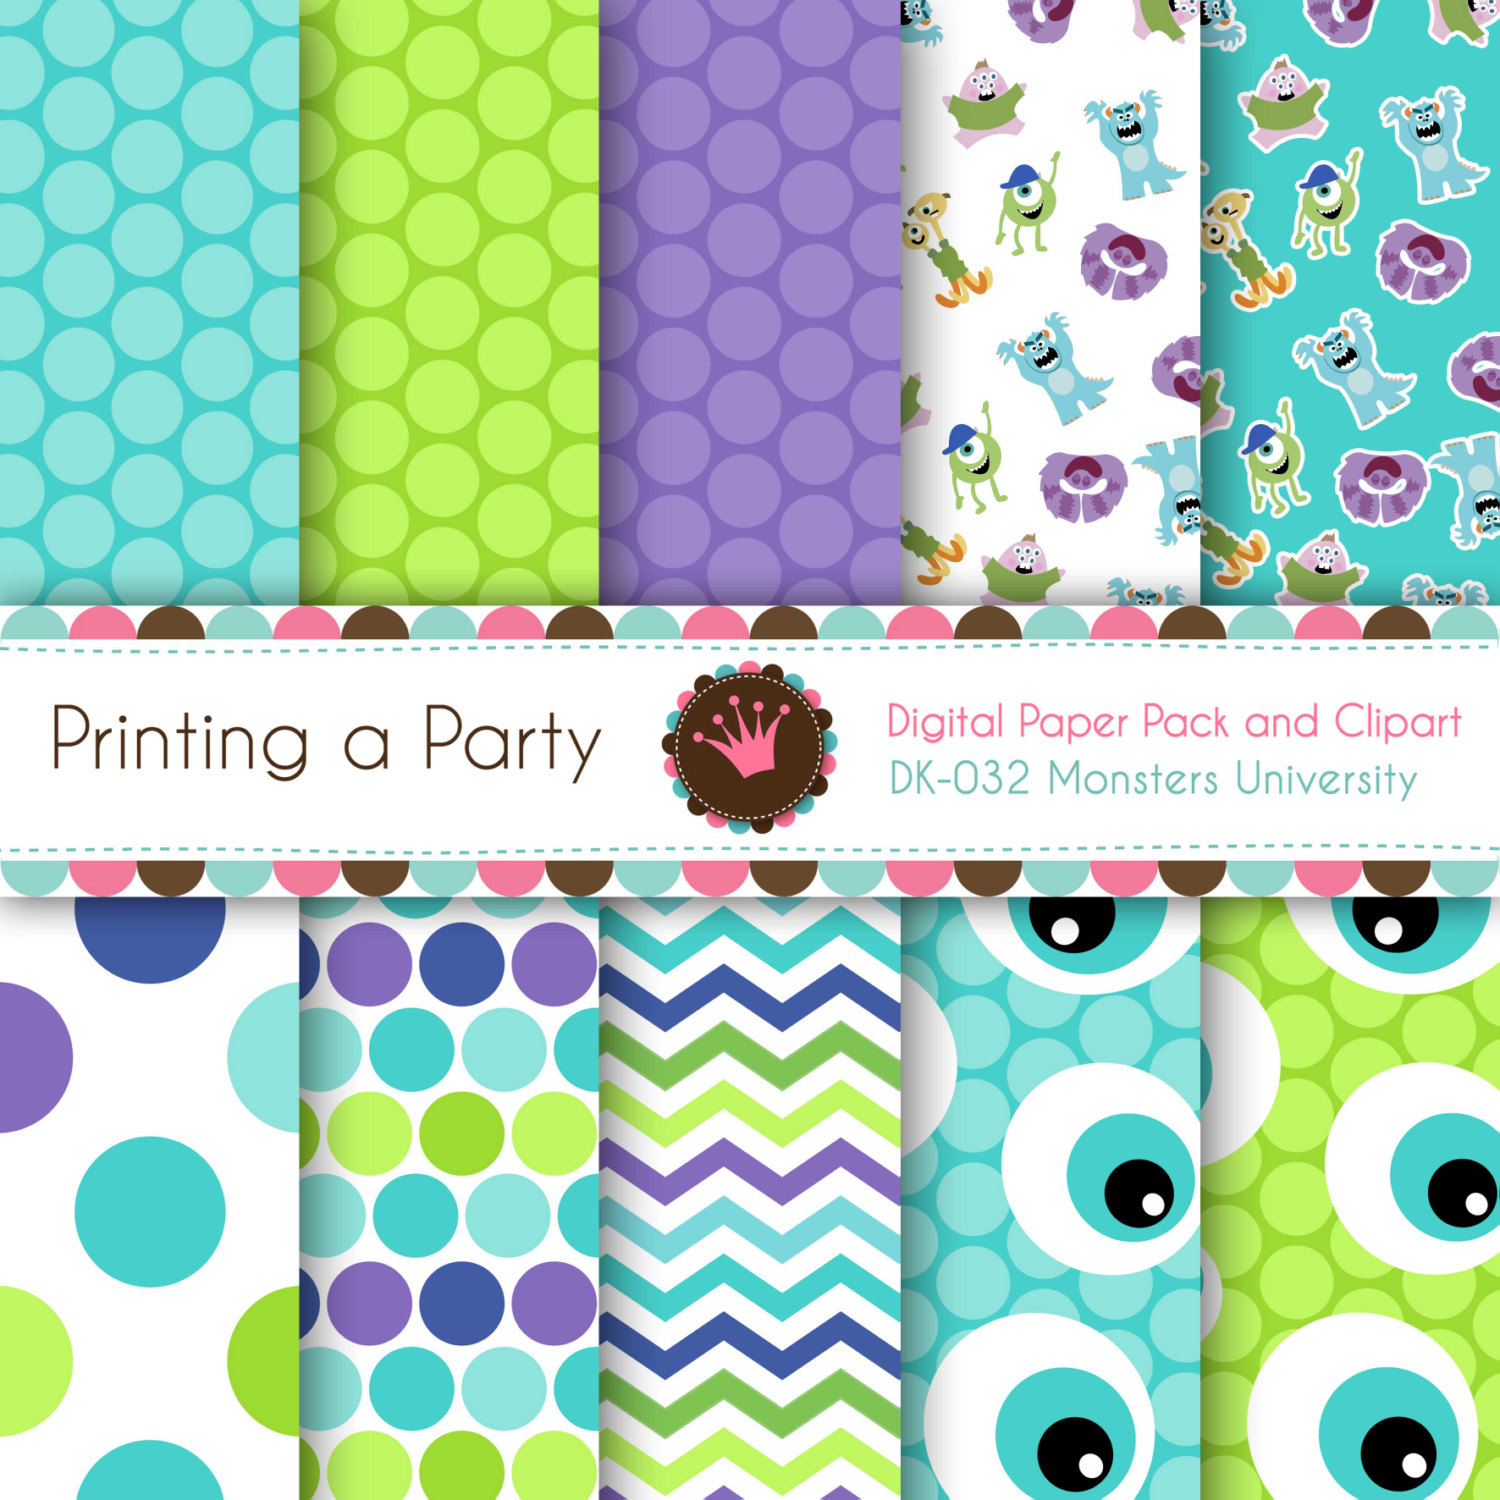 Digital Paper Pack And Clip Art Monsters By Printingaparty On Etsy